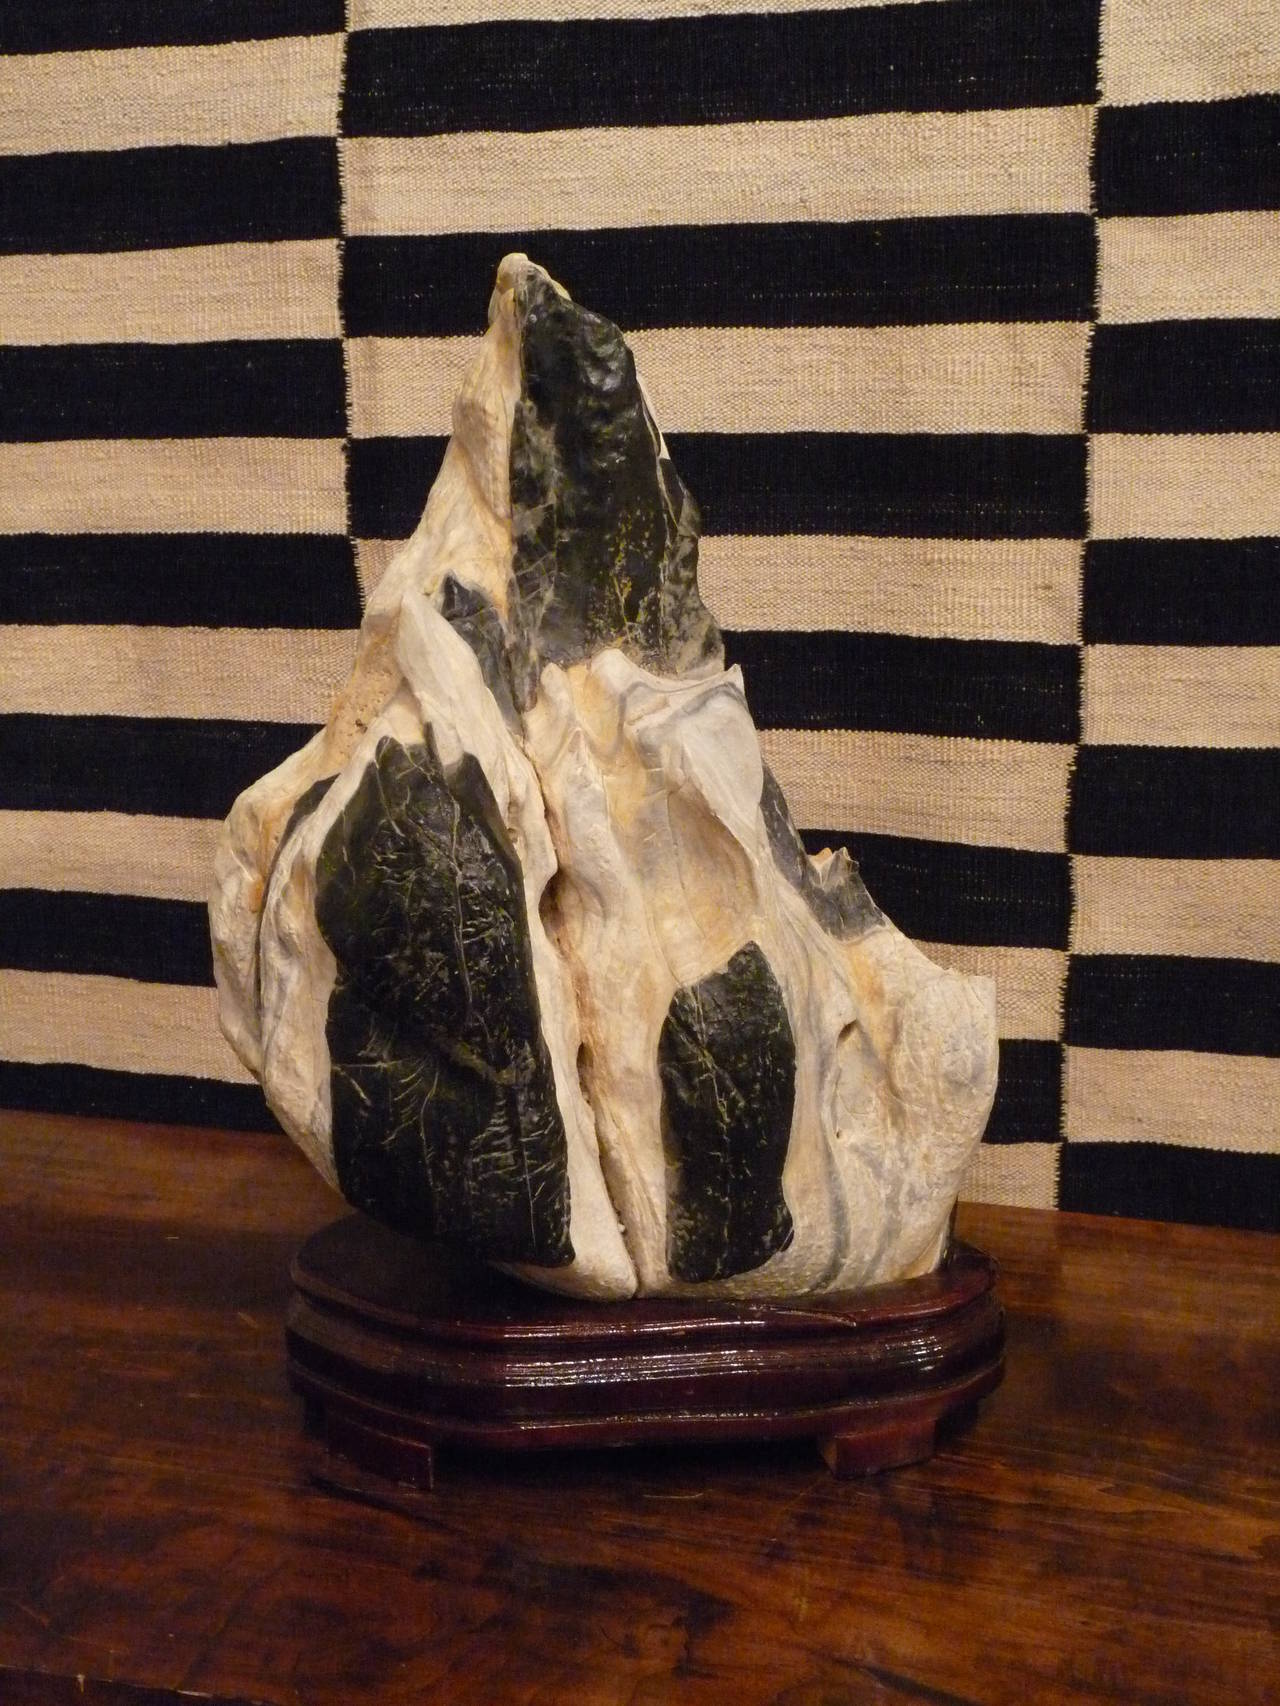 Scholar's rocks (or Gonshi) began as stones that resembled or represented mythological or famous mountains in China.  While others are appreciated for their dramatic form, wondrous colors or feelings they evoke from the viewer.    

This scholar's